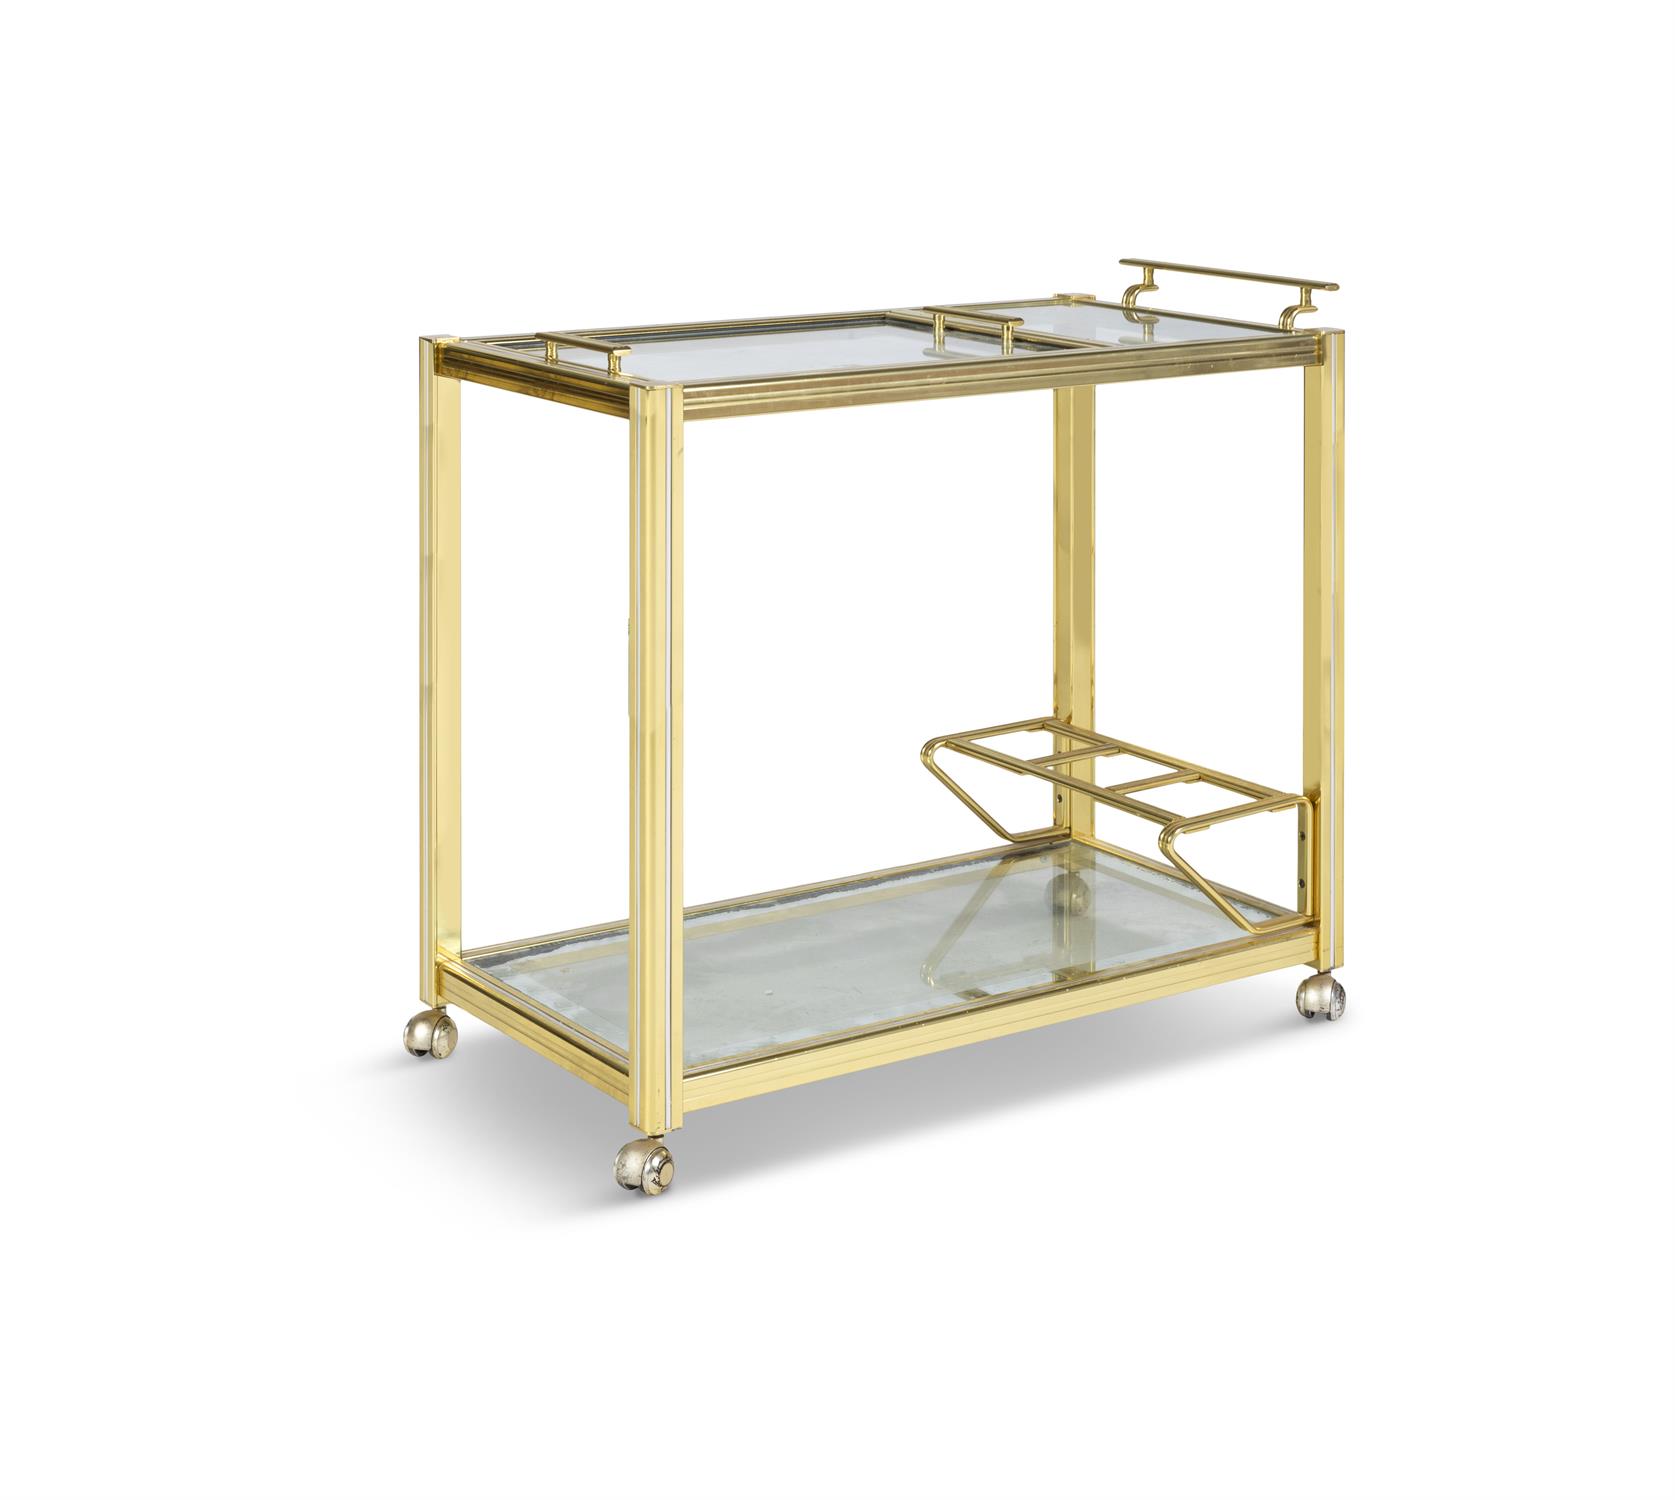 PIERRE VANDEL A gilt metal and chrome drinks trolley attrib. to Pierre Vandel with glass tops and